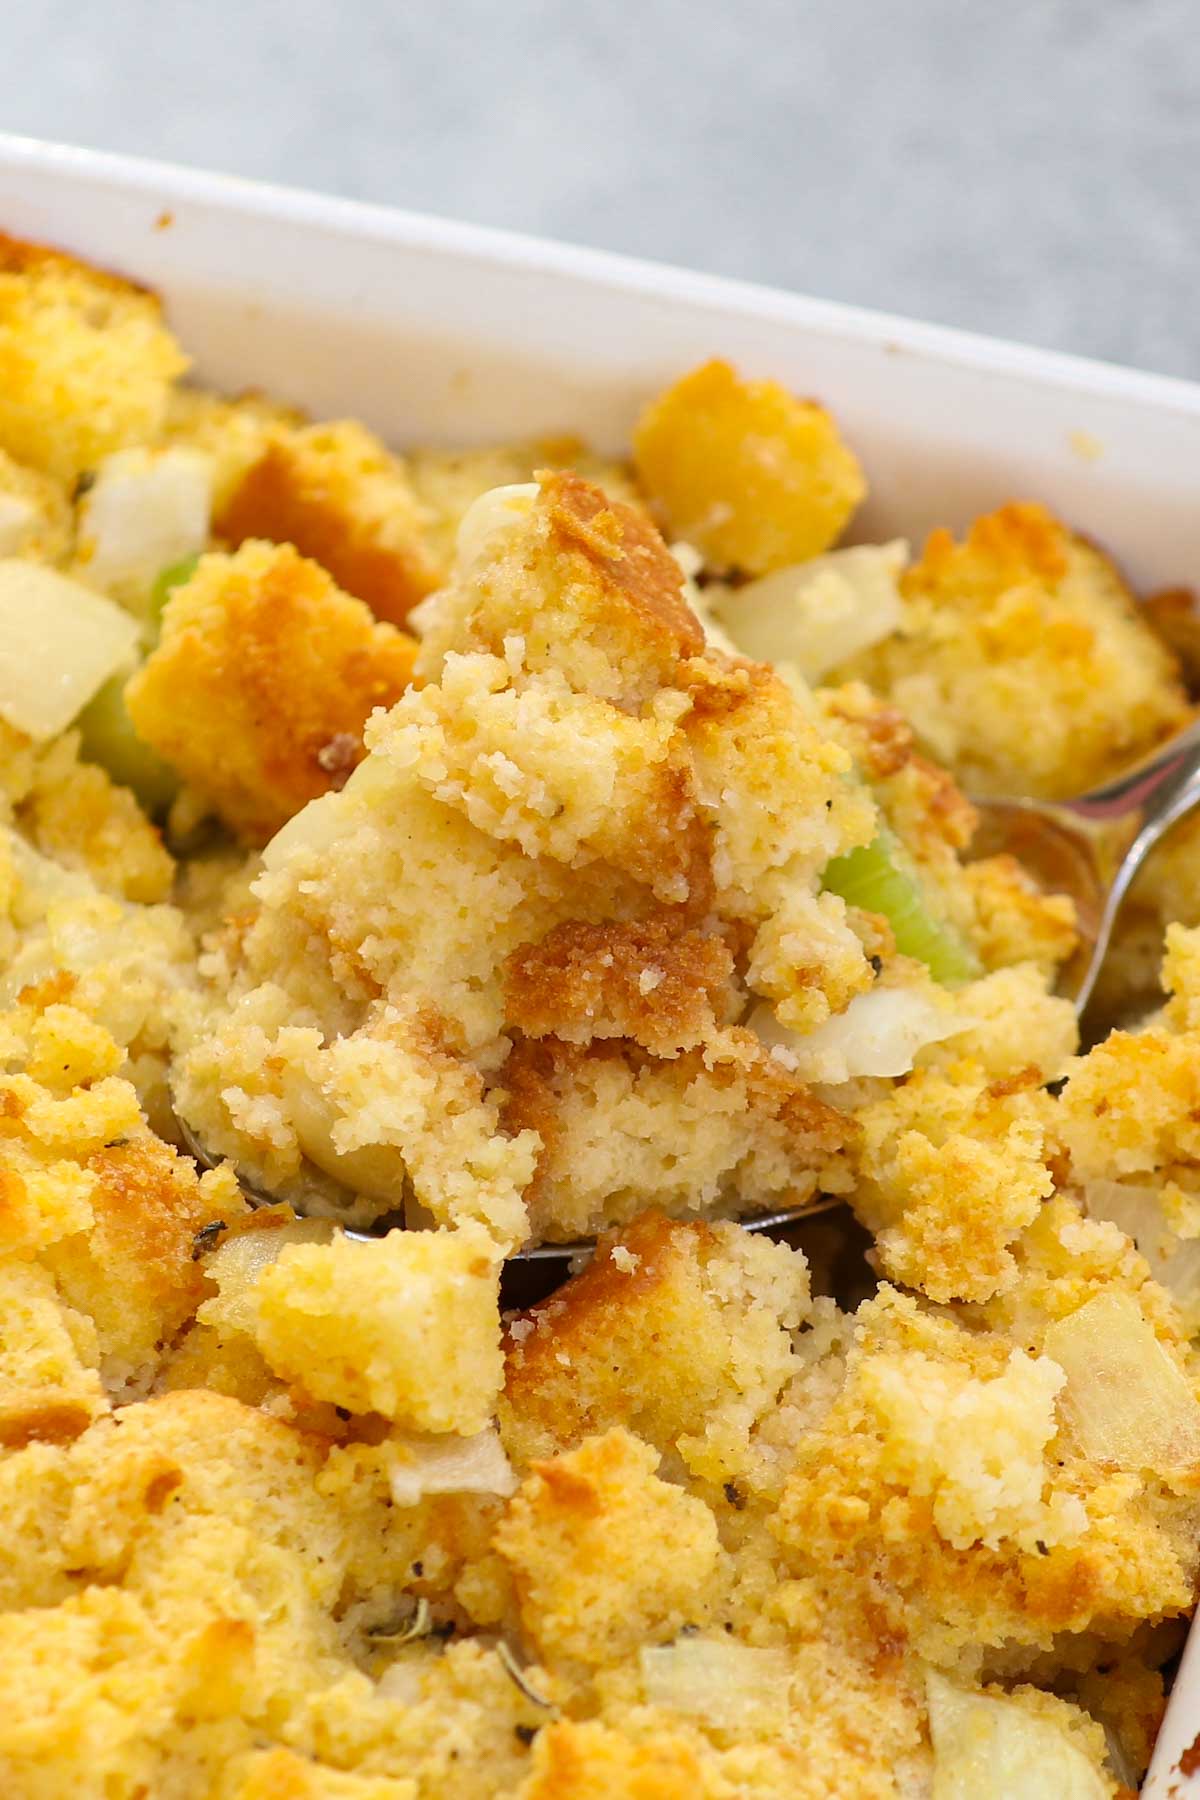 If you’re looking for a comforting, old-fashioned Southern dish, look no further than Cornbread Dressing. This Paula Deen cornbread stuffing is the perfect holiday side dish for your Thanksgiving or Christmas dinner menu. Enjoy it with your favorite proteins and a smothering of cranberry sauce for a supremely festive dish.